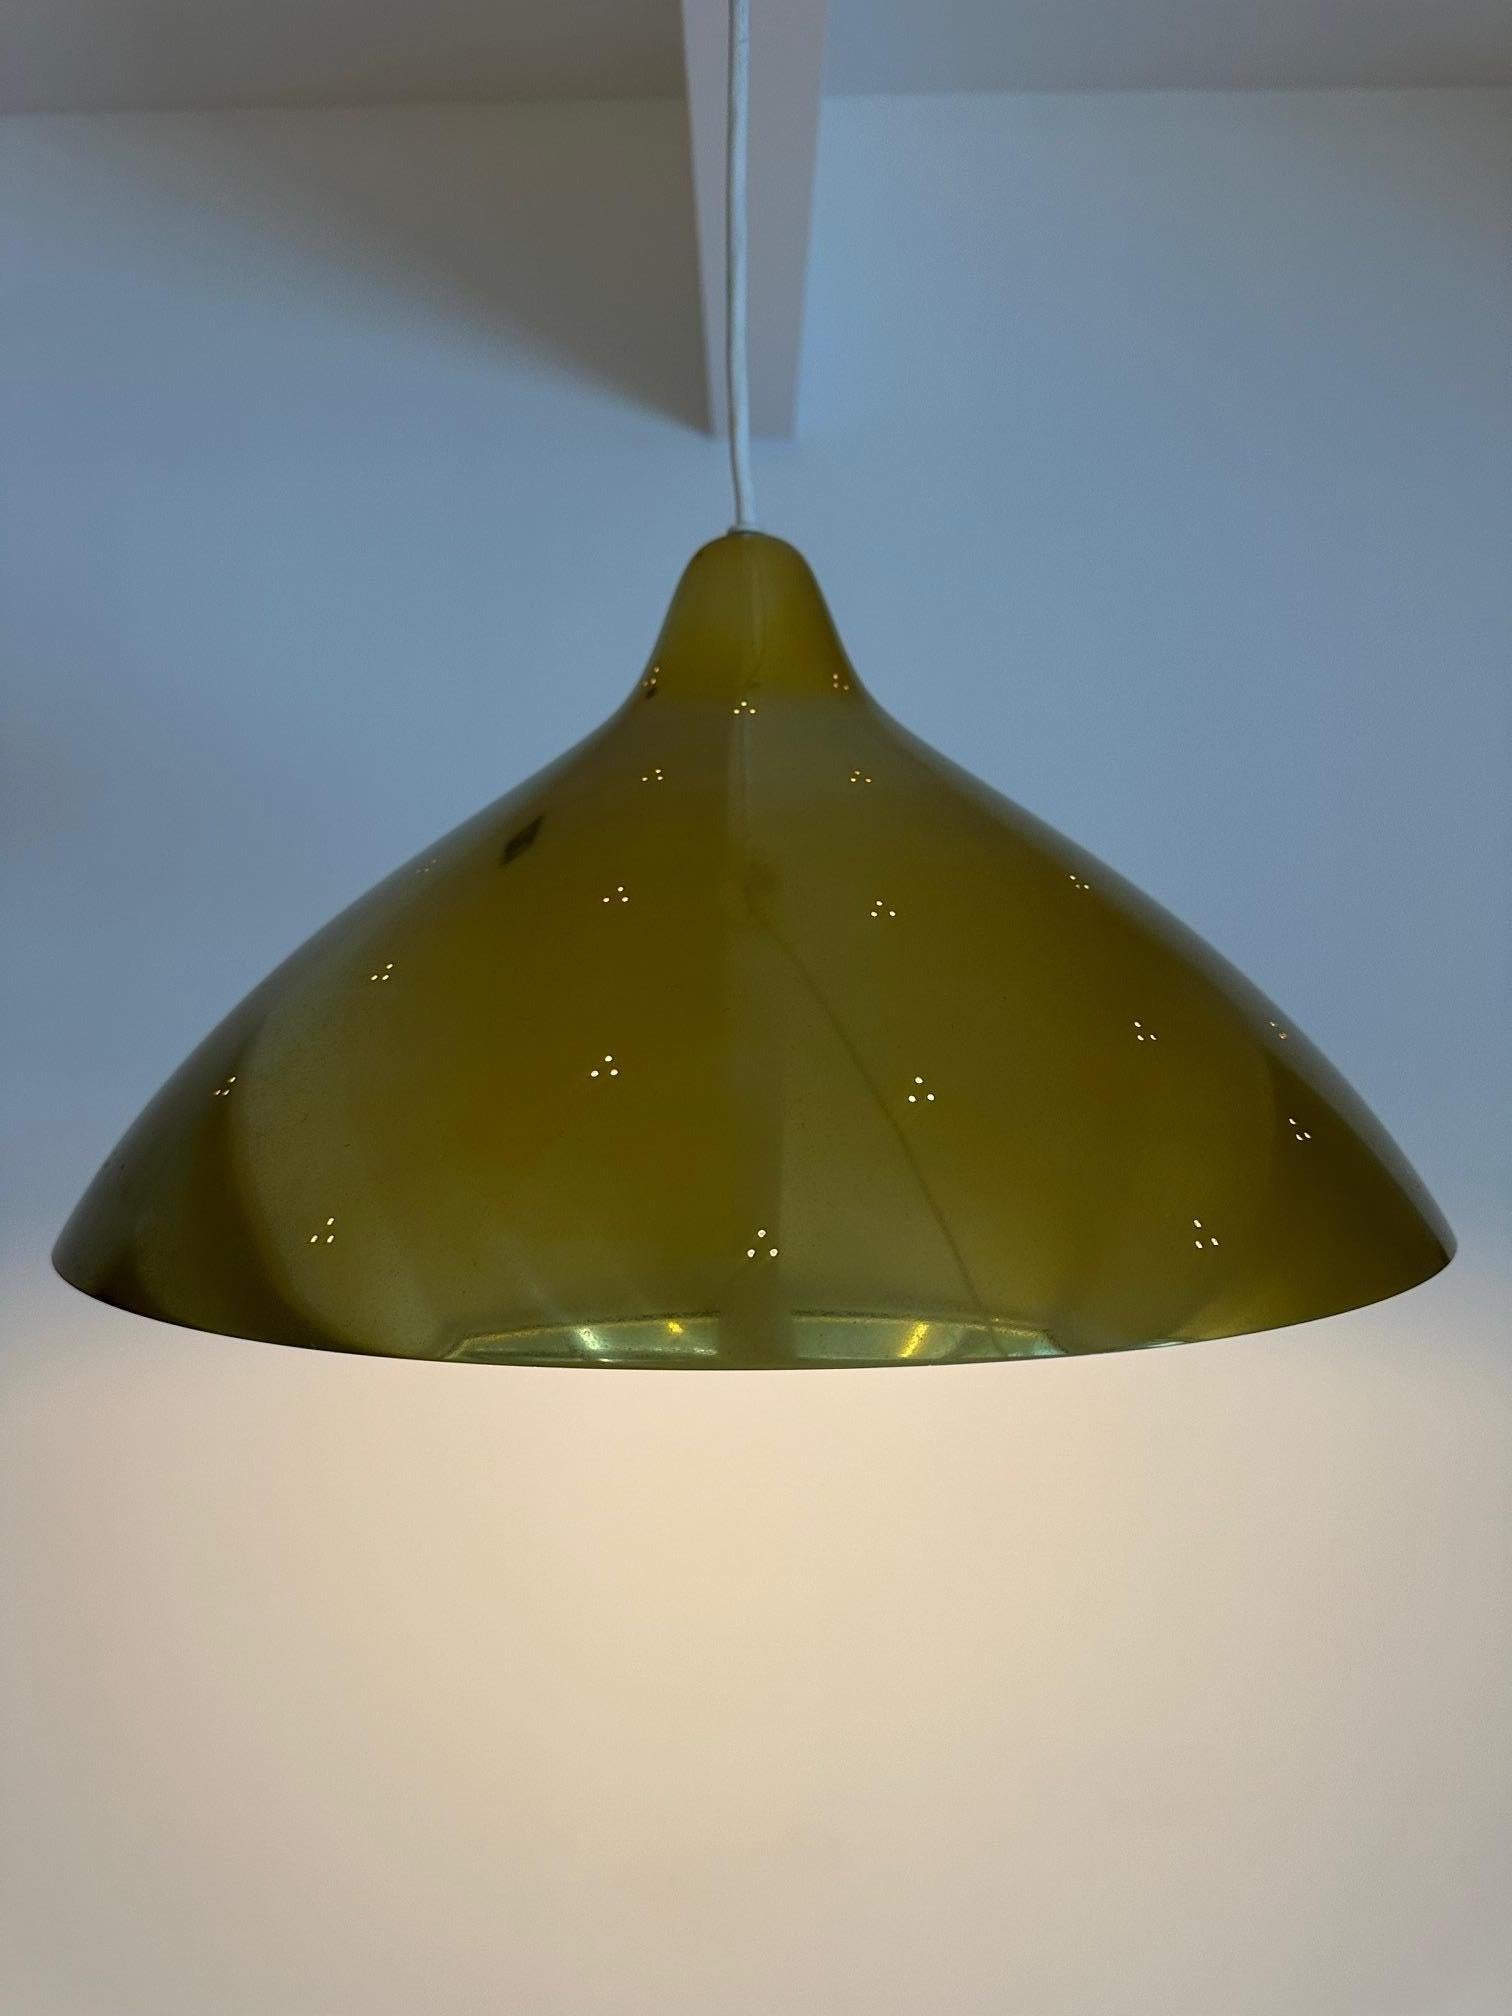 With a large scale of 44 cm in diameter, it will make a bold and striking statement in any room. This pendant is made for Thorn-Orno, a renowned Finnish lighting brand known for their high-quality and innovative designs. The brass finish adds a